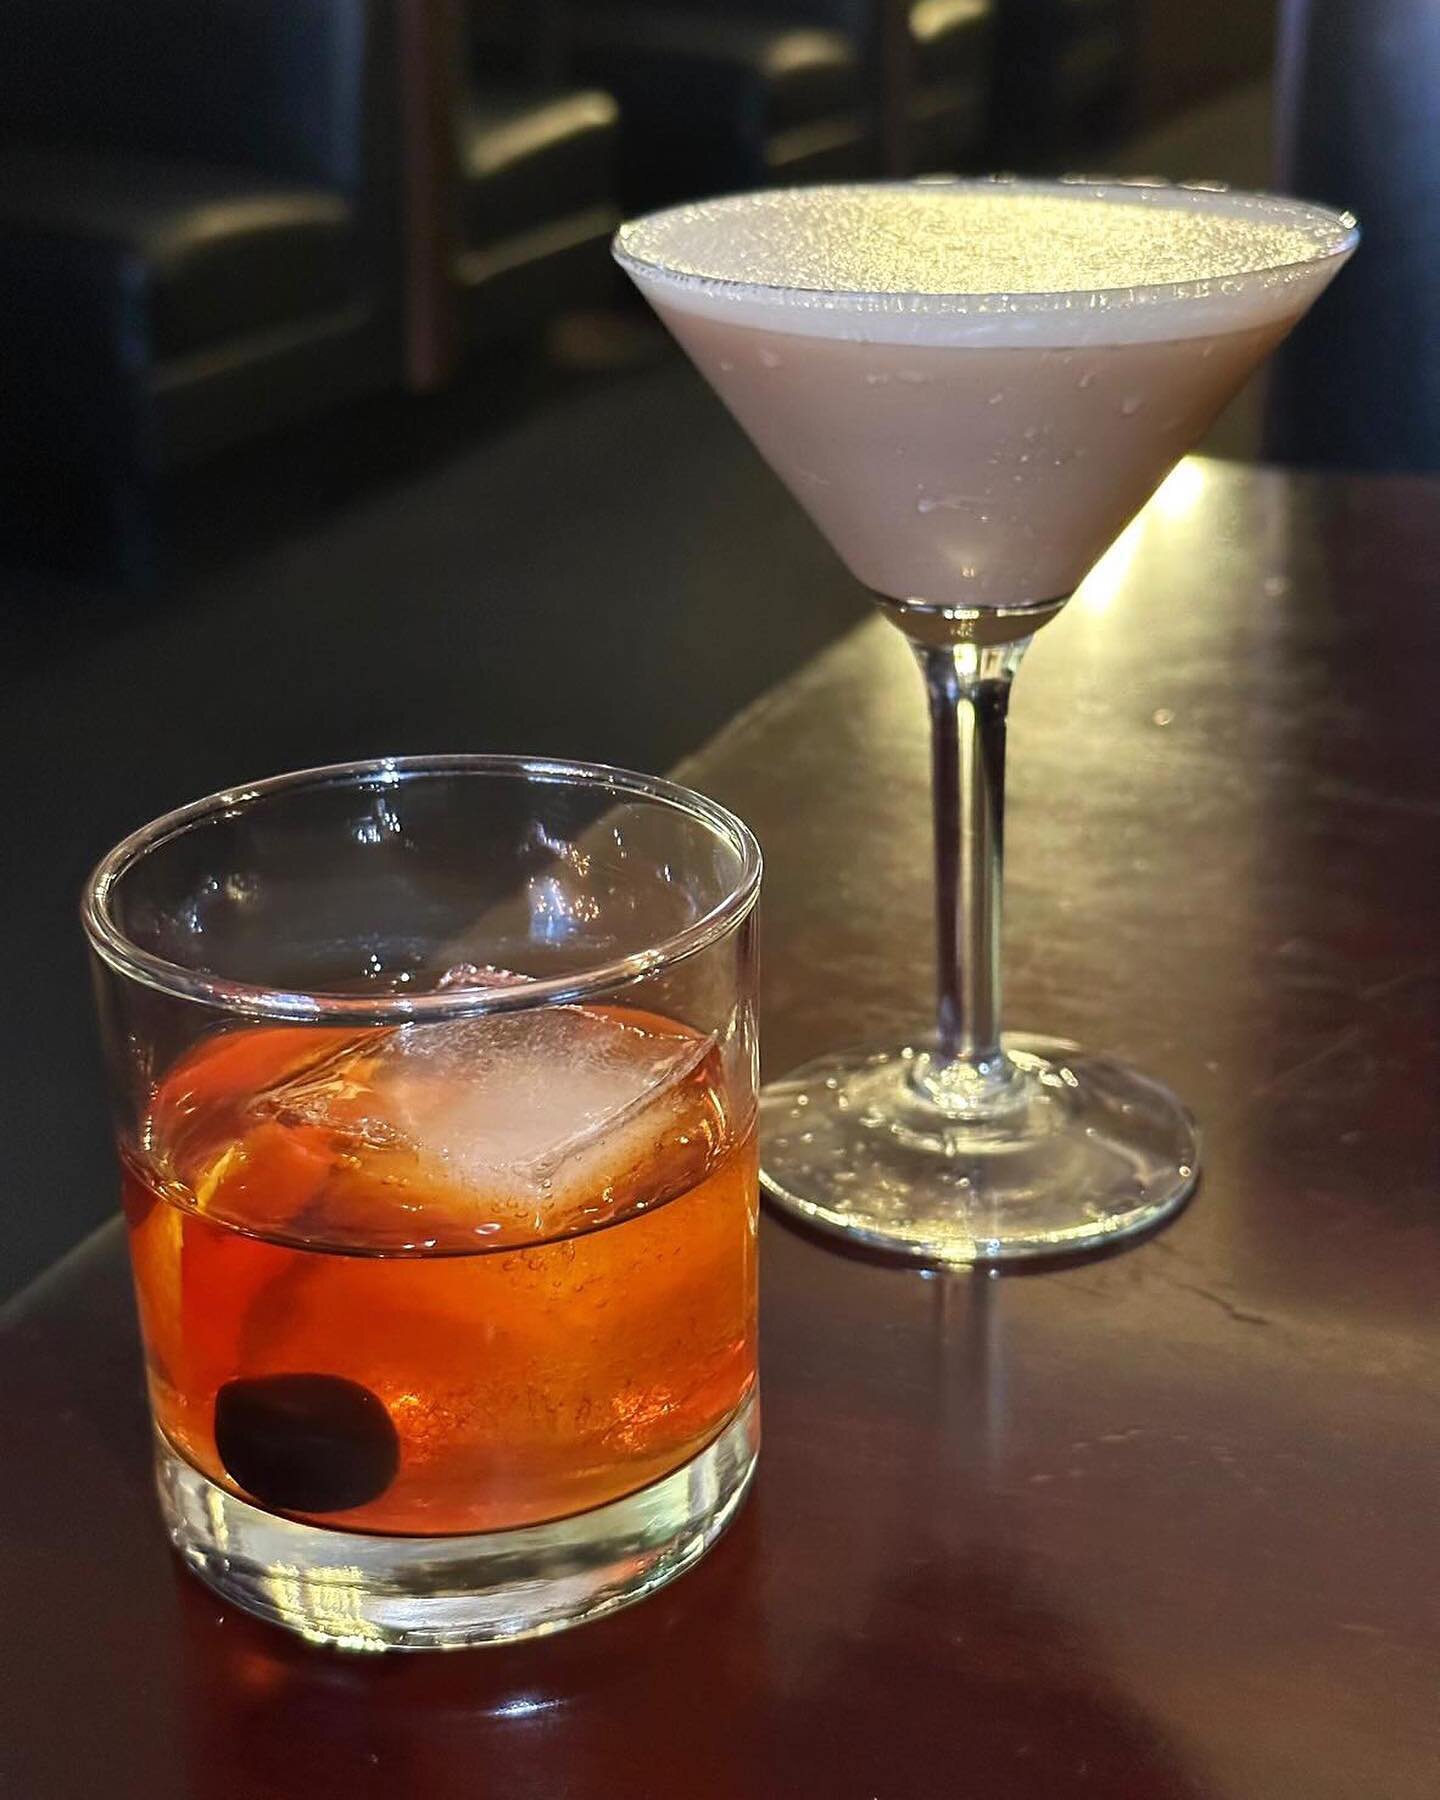 There&rsquo;s no better hour than HAPPY HOUR&hellip; and ours is everyday 🤩🤩🤩 Come in today to get your fix! From 4-7PM DAILY! 🥳🥳🥳 #engineco28 #enginecono28 #dtla #dtlafoodie #dtlarestaurant #happyhour #happyhourdrinks #dtlahappyhour